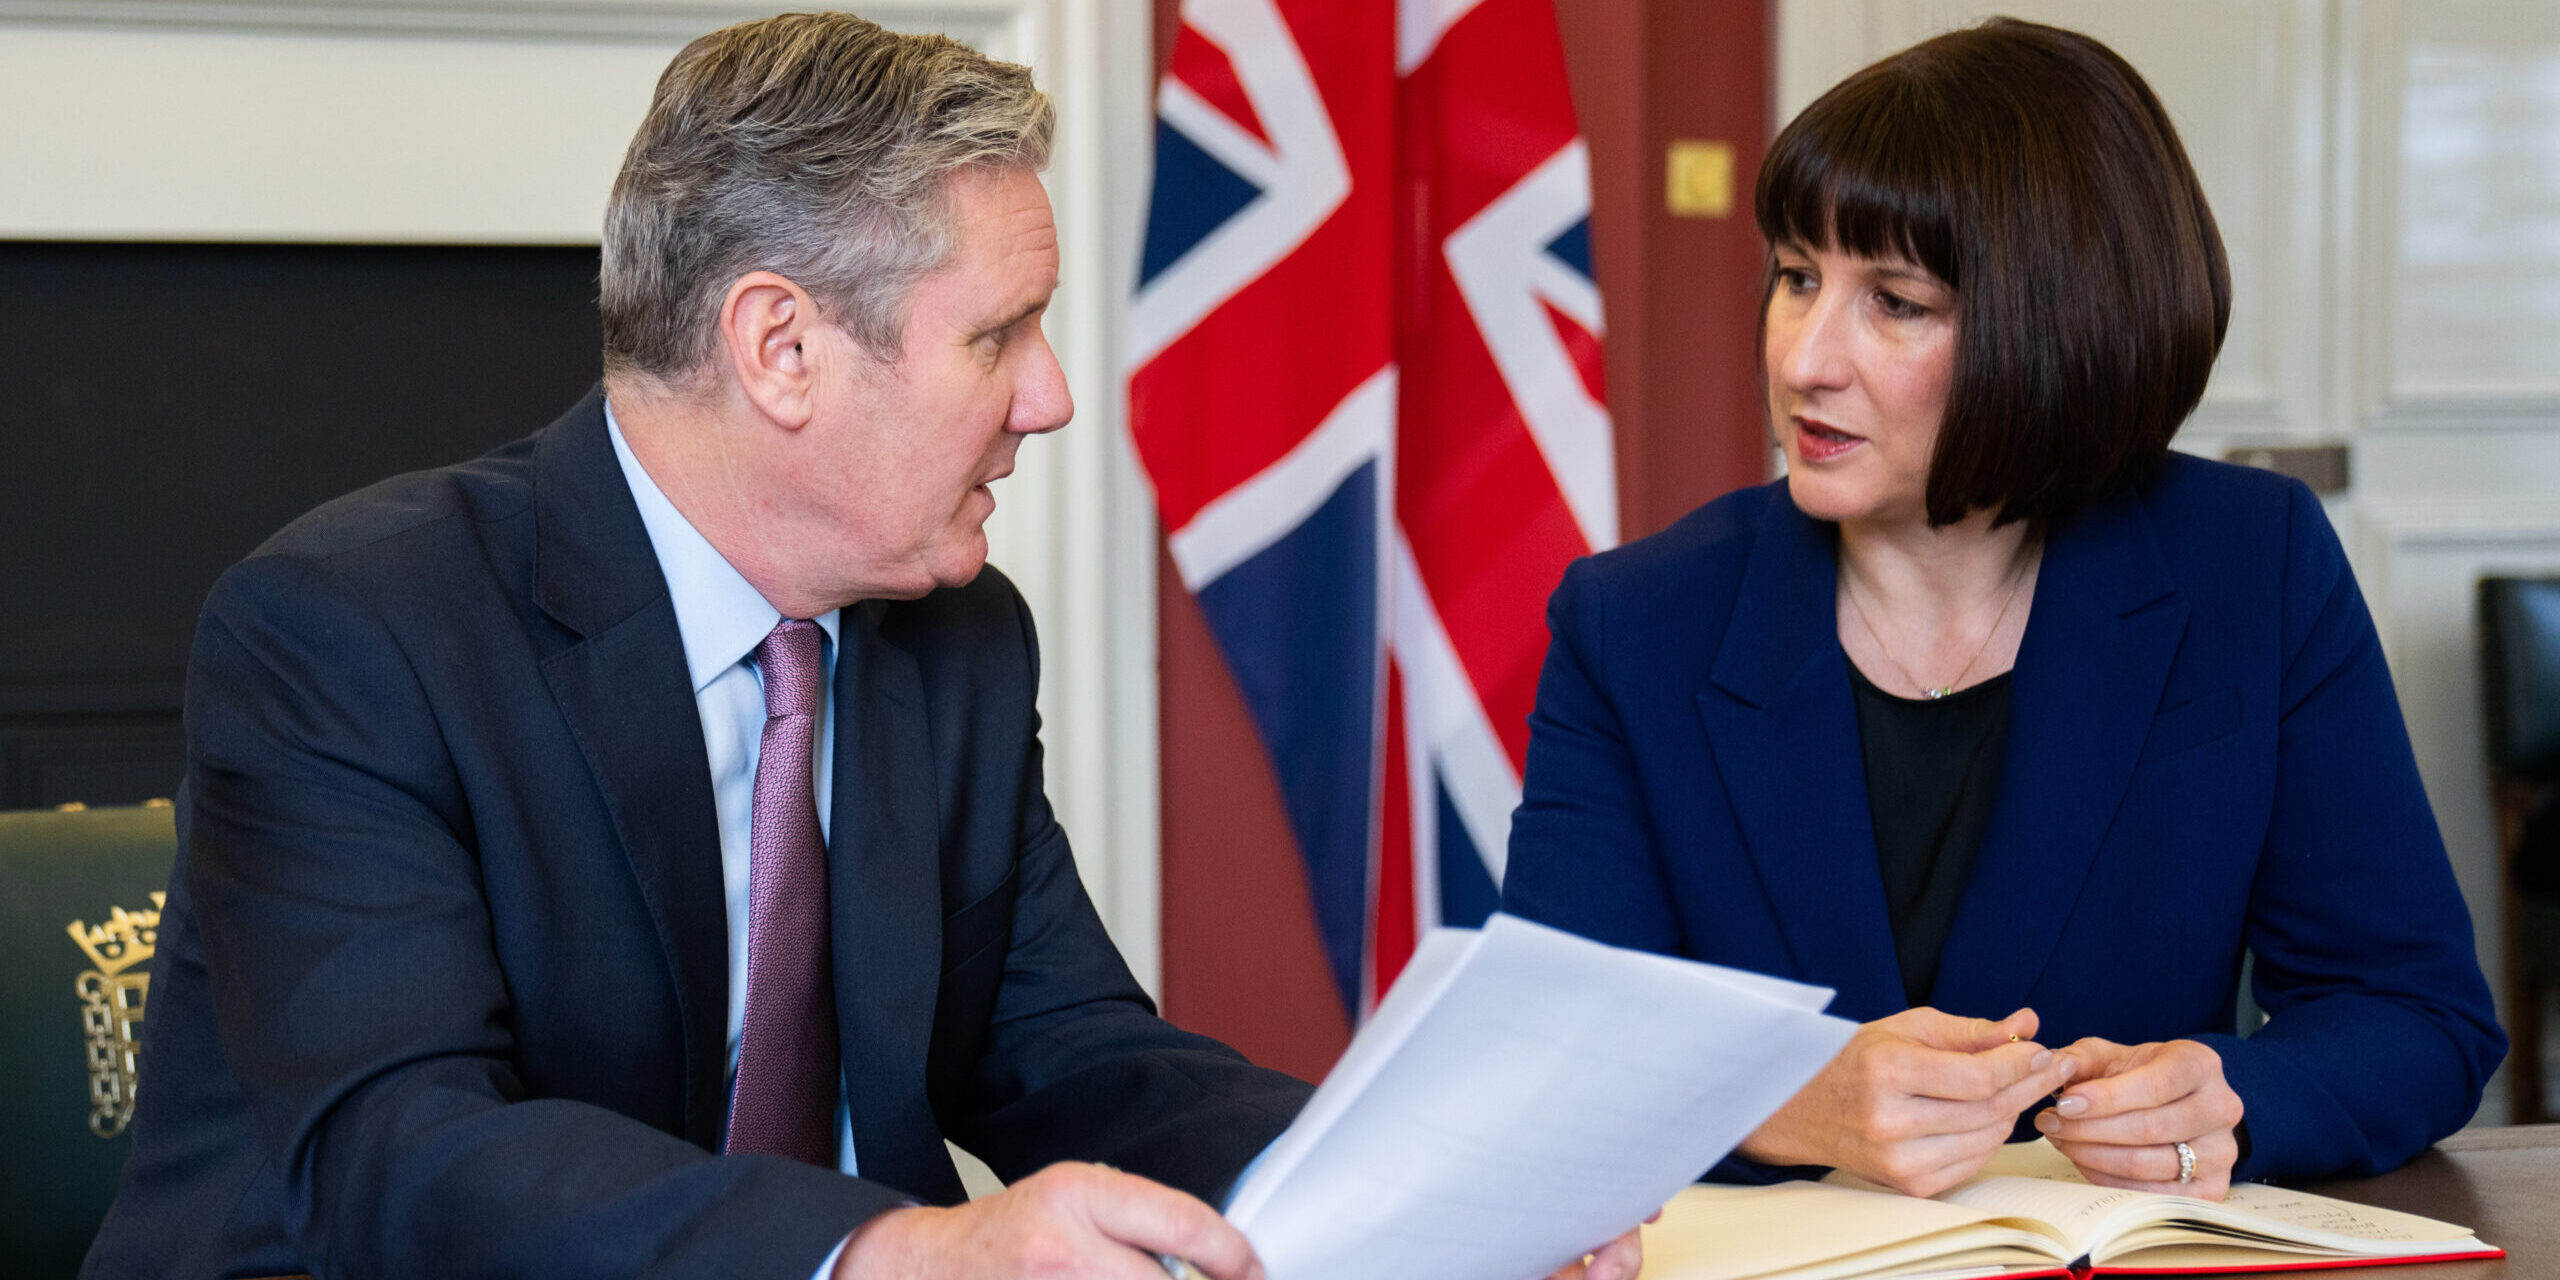 Keir Starmer and Rachel Reeves sat at a table, looking at each other in front of a Union flag